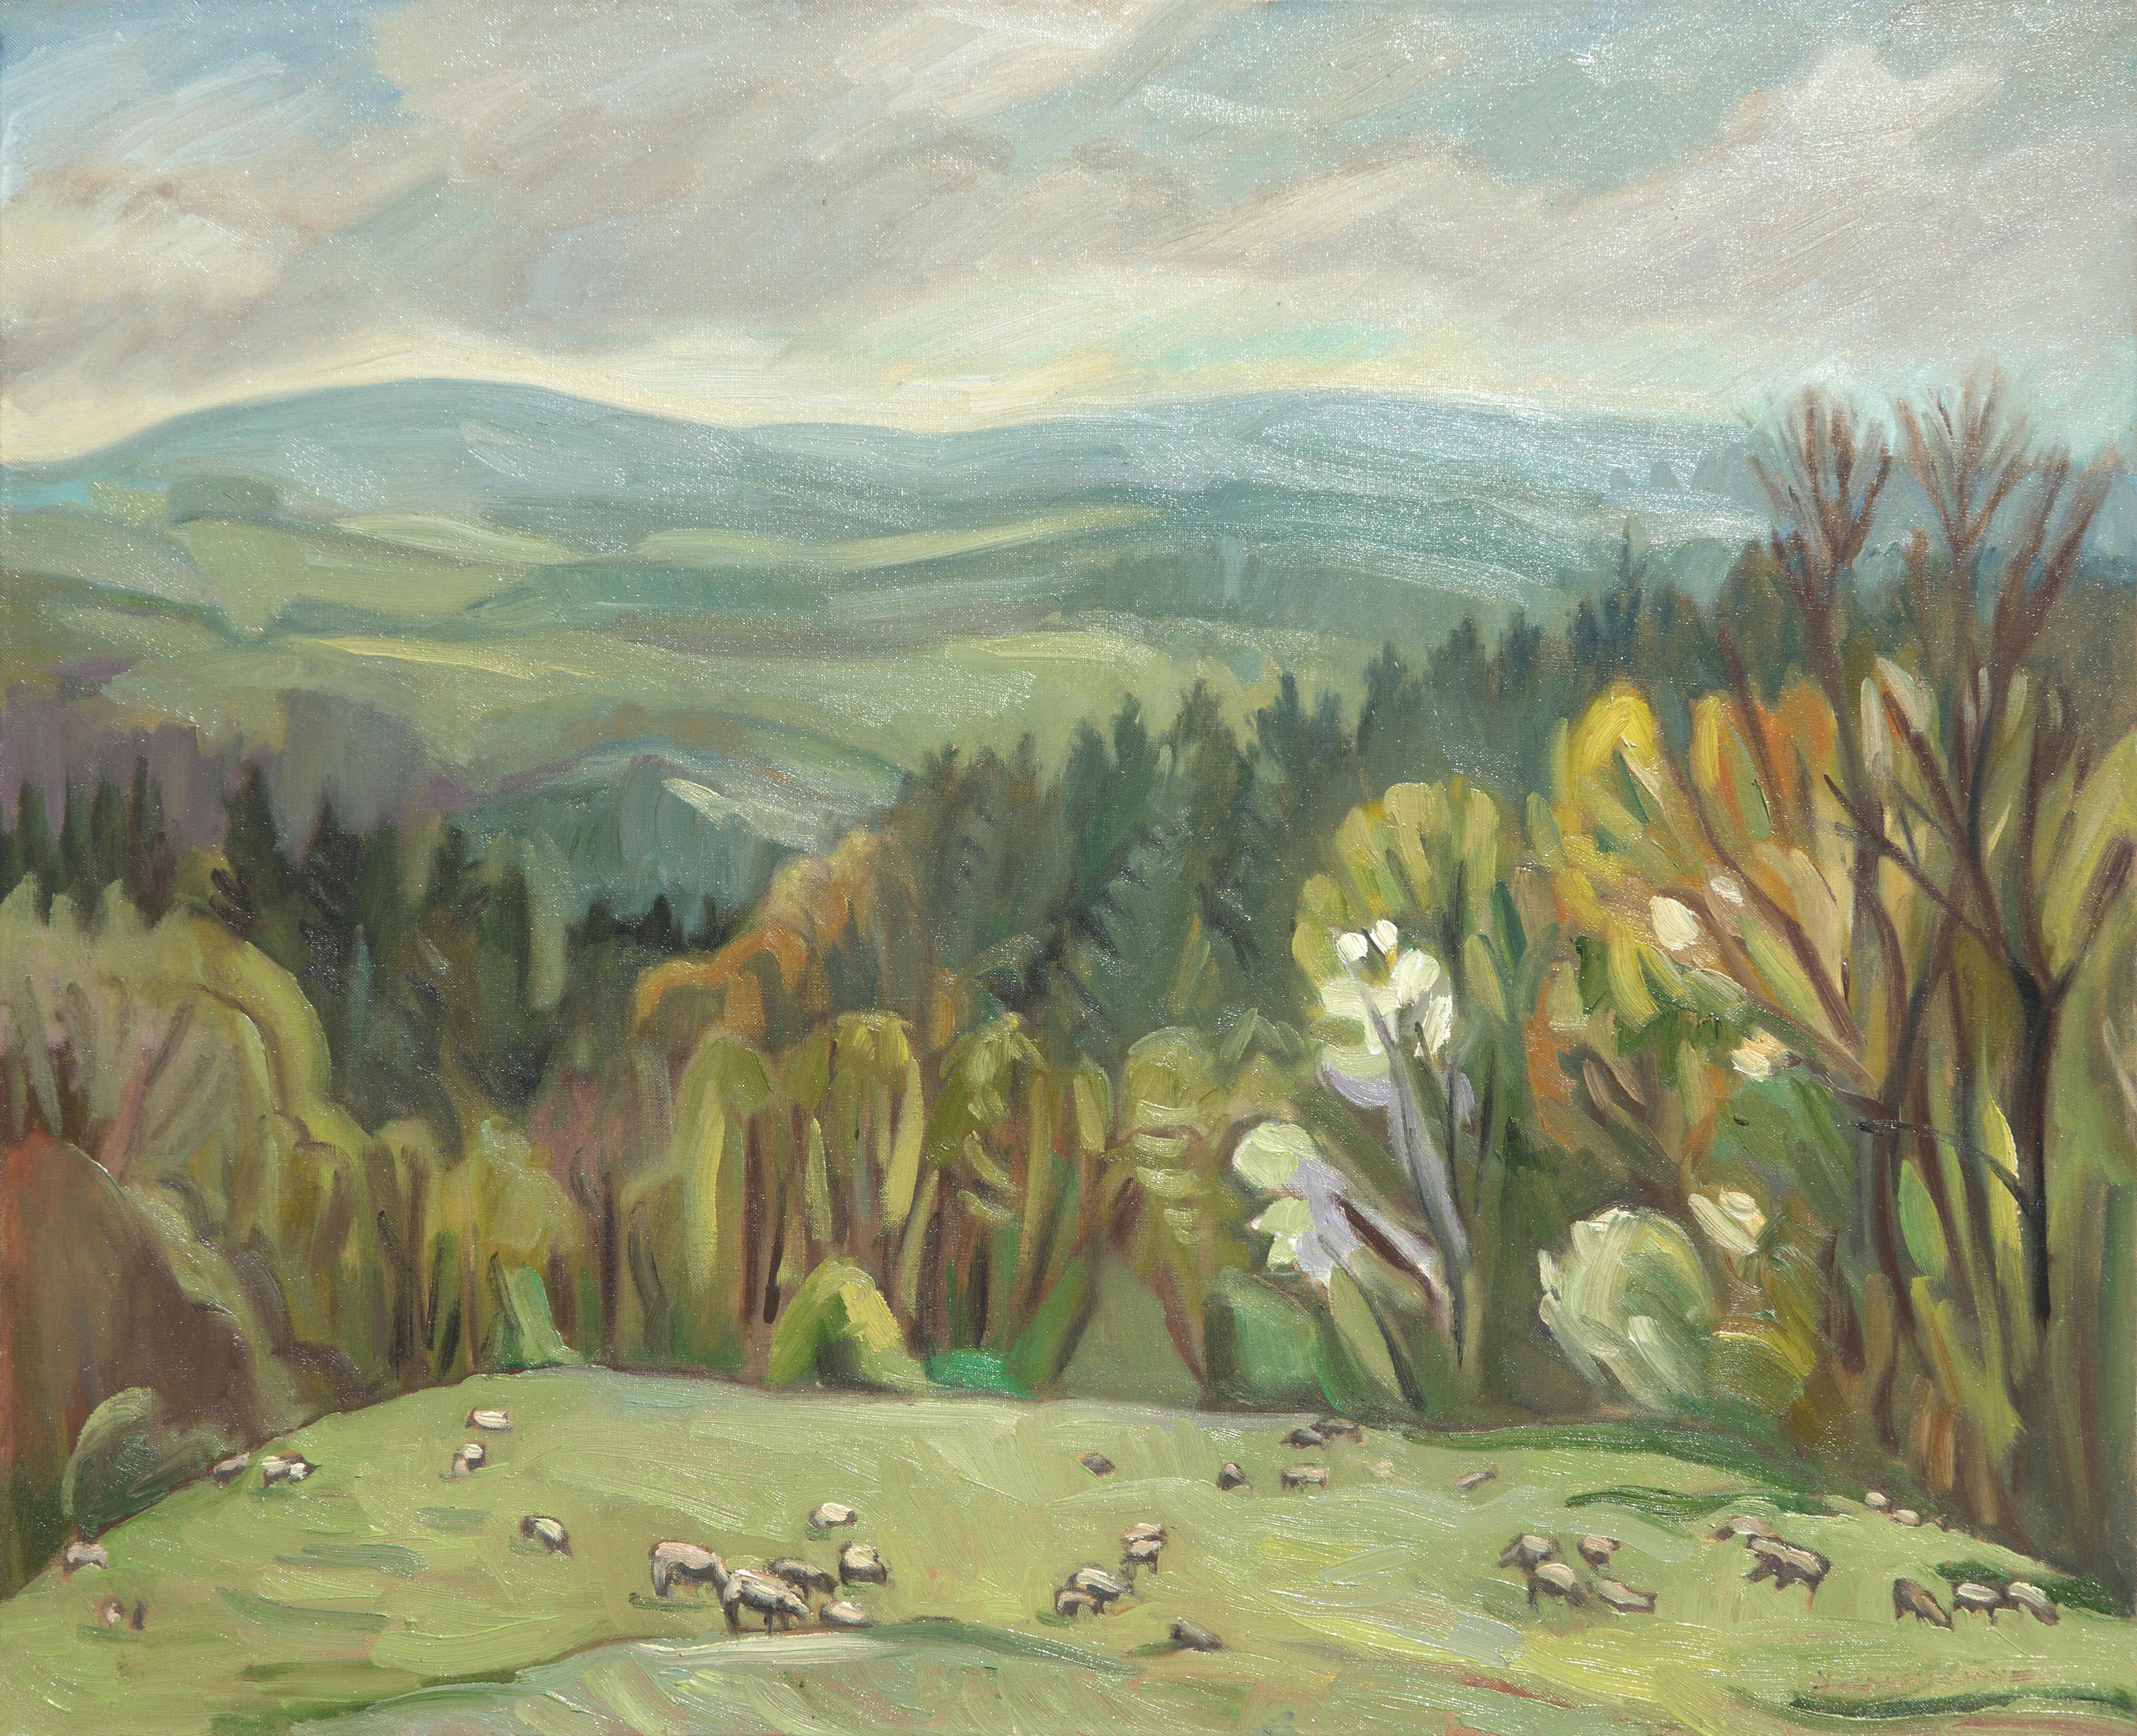 Yves Calméjane Landscape Painting - "The Sheeps", Graze, Forest and Hills Green Impressionist Landscape Oil Painting